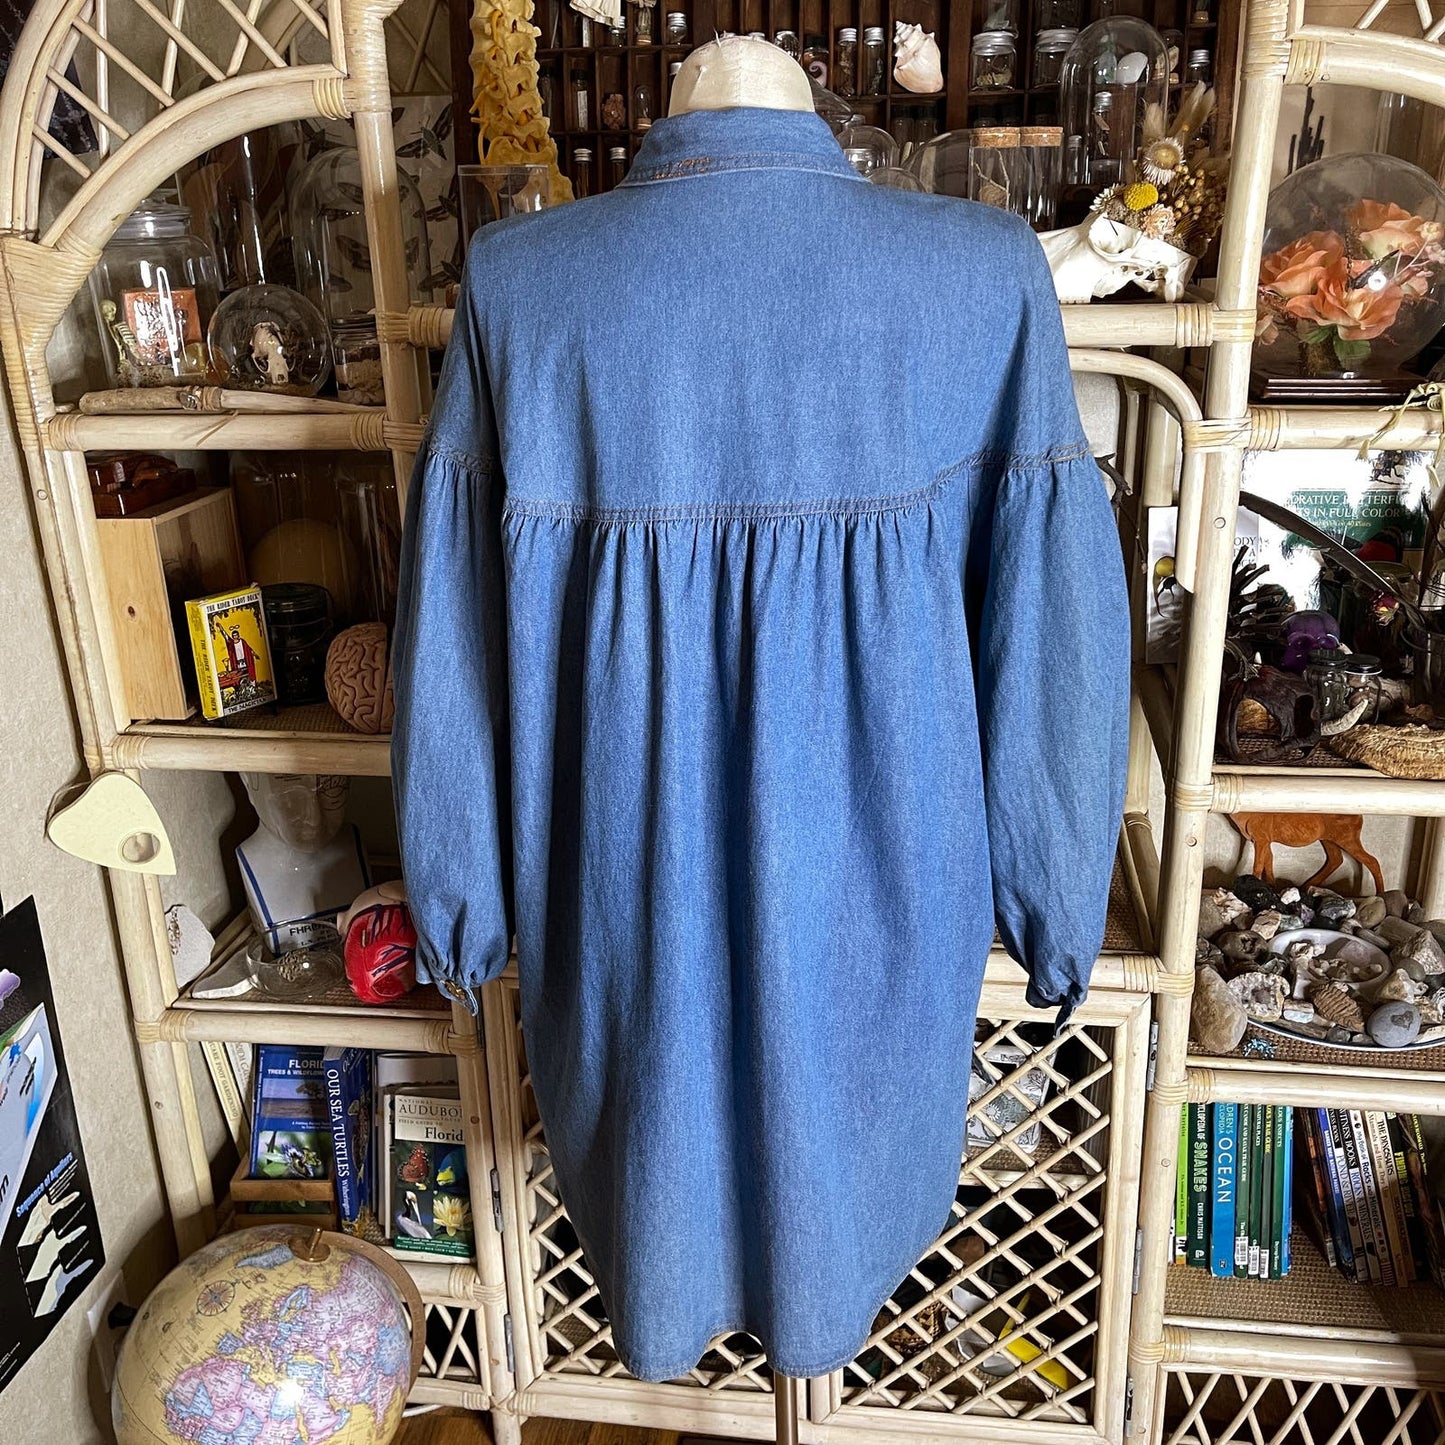 Vintage 90s Chambray Tunic Dress Celestial Moon and Sun Buttons Fun Dimensions